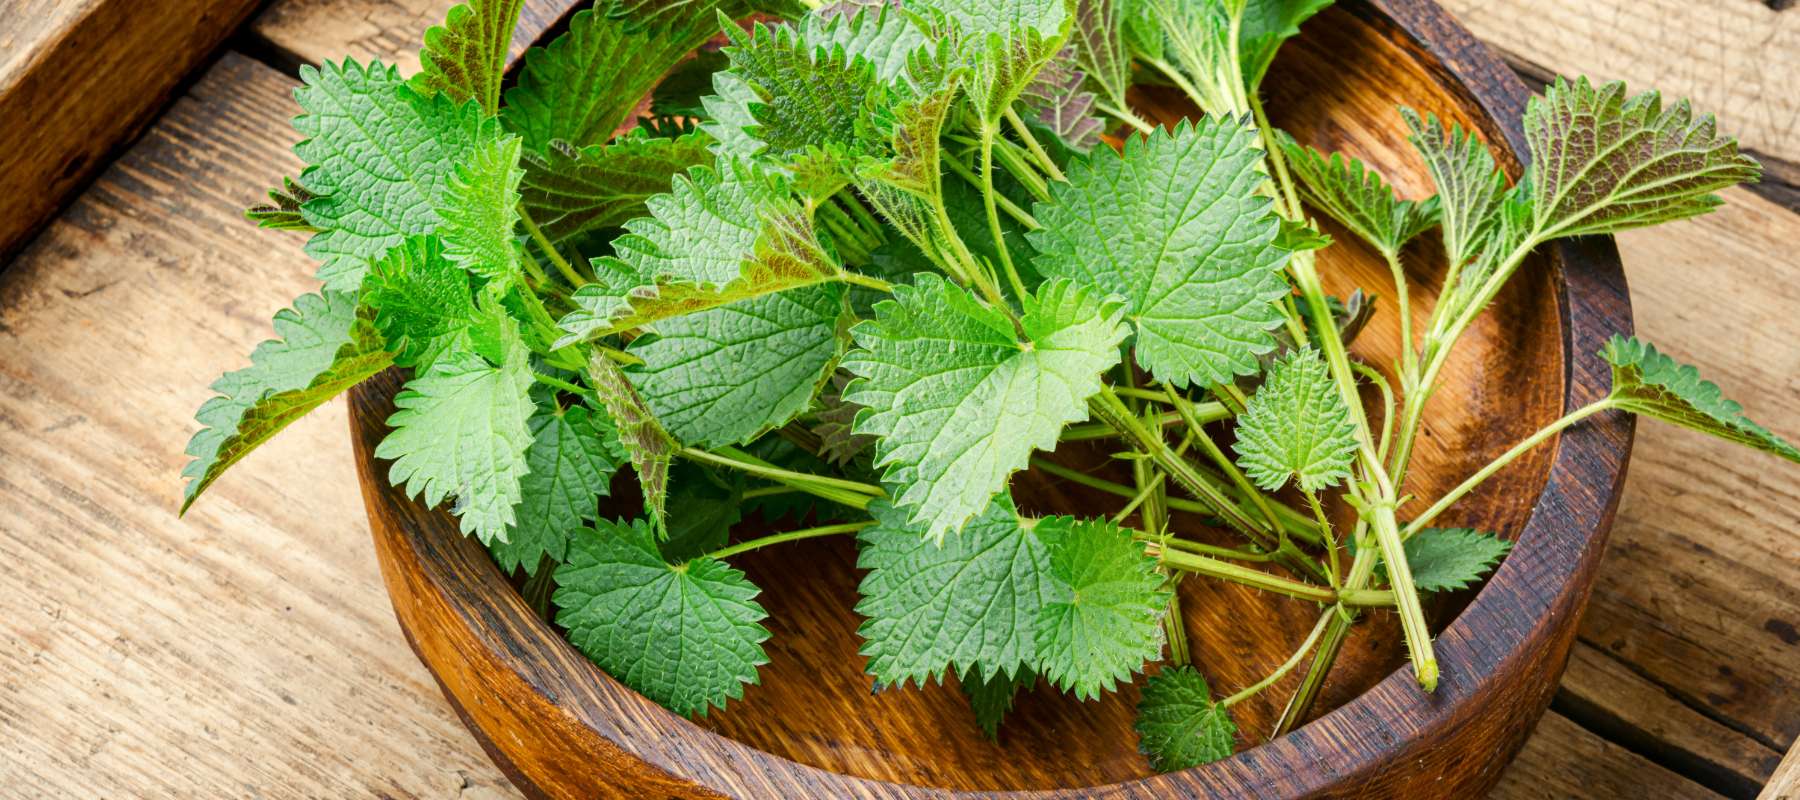 The Benefits of Growing Stinging Nettle